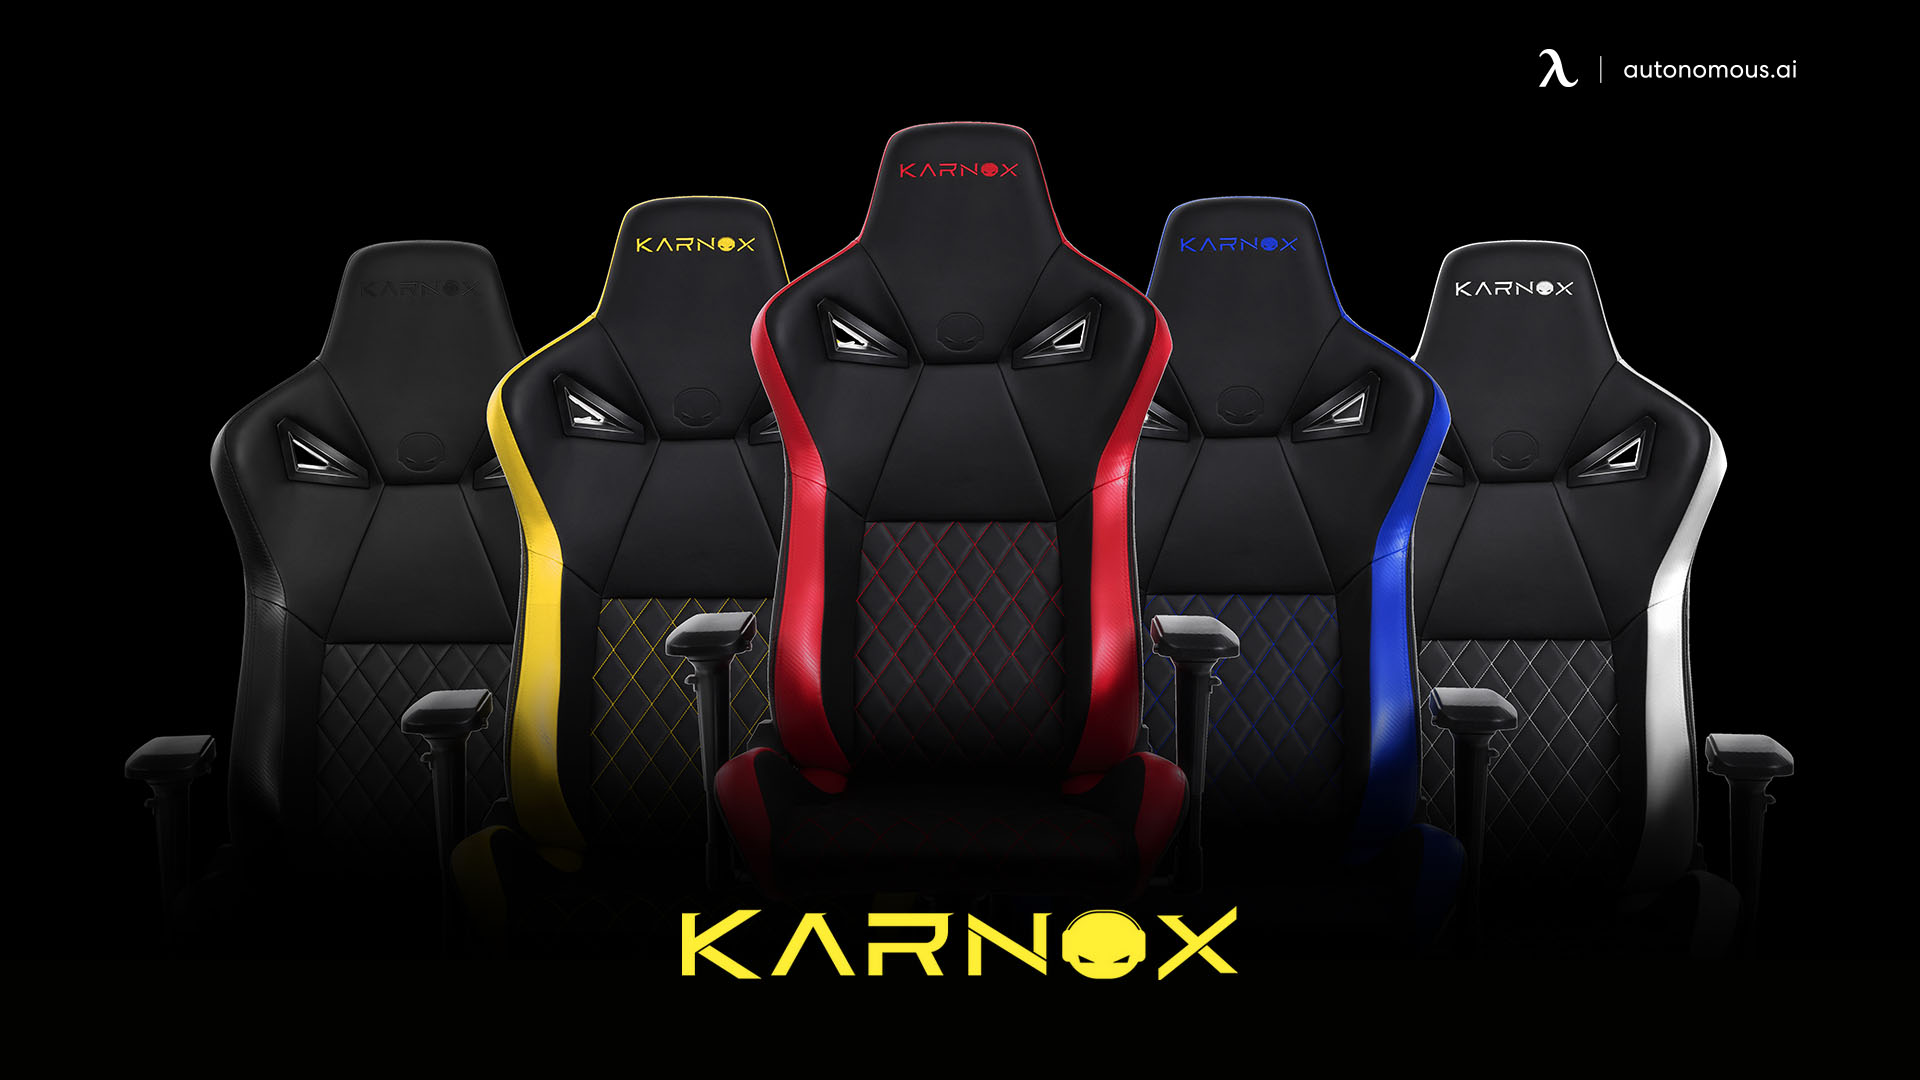 Karnox Gaming Chair Review 2022: Should You Buy One?